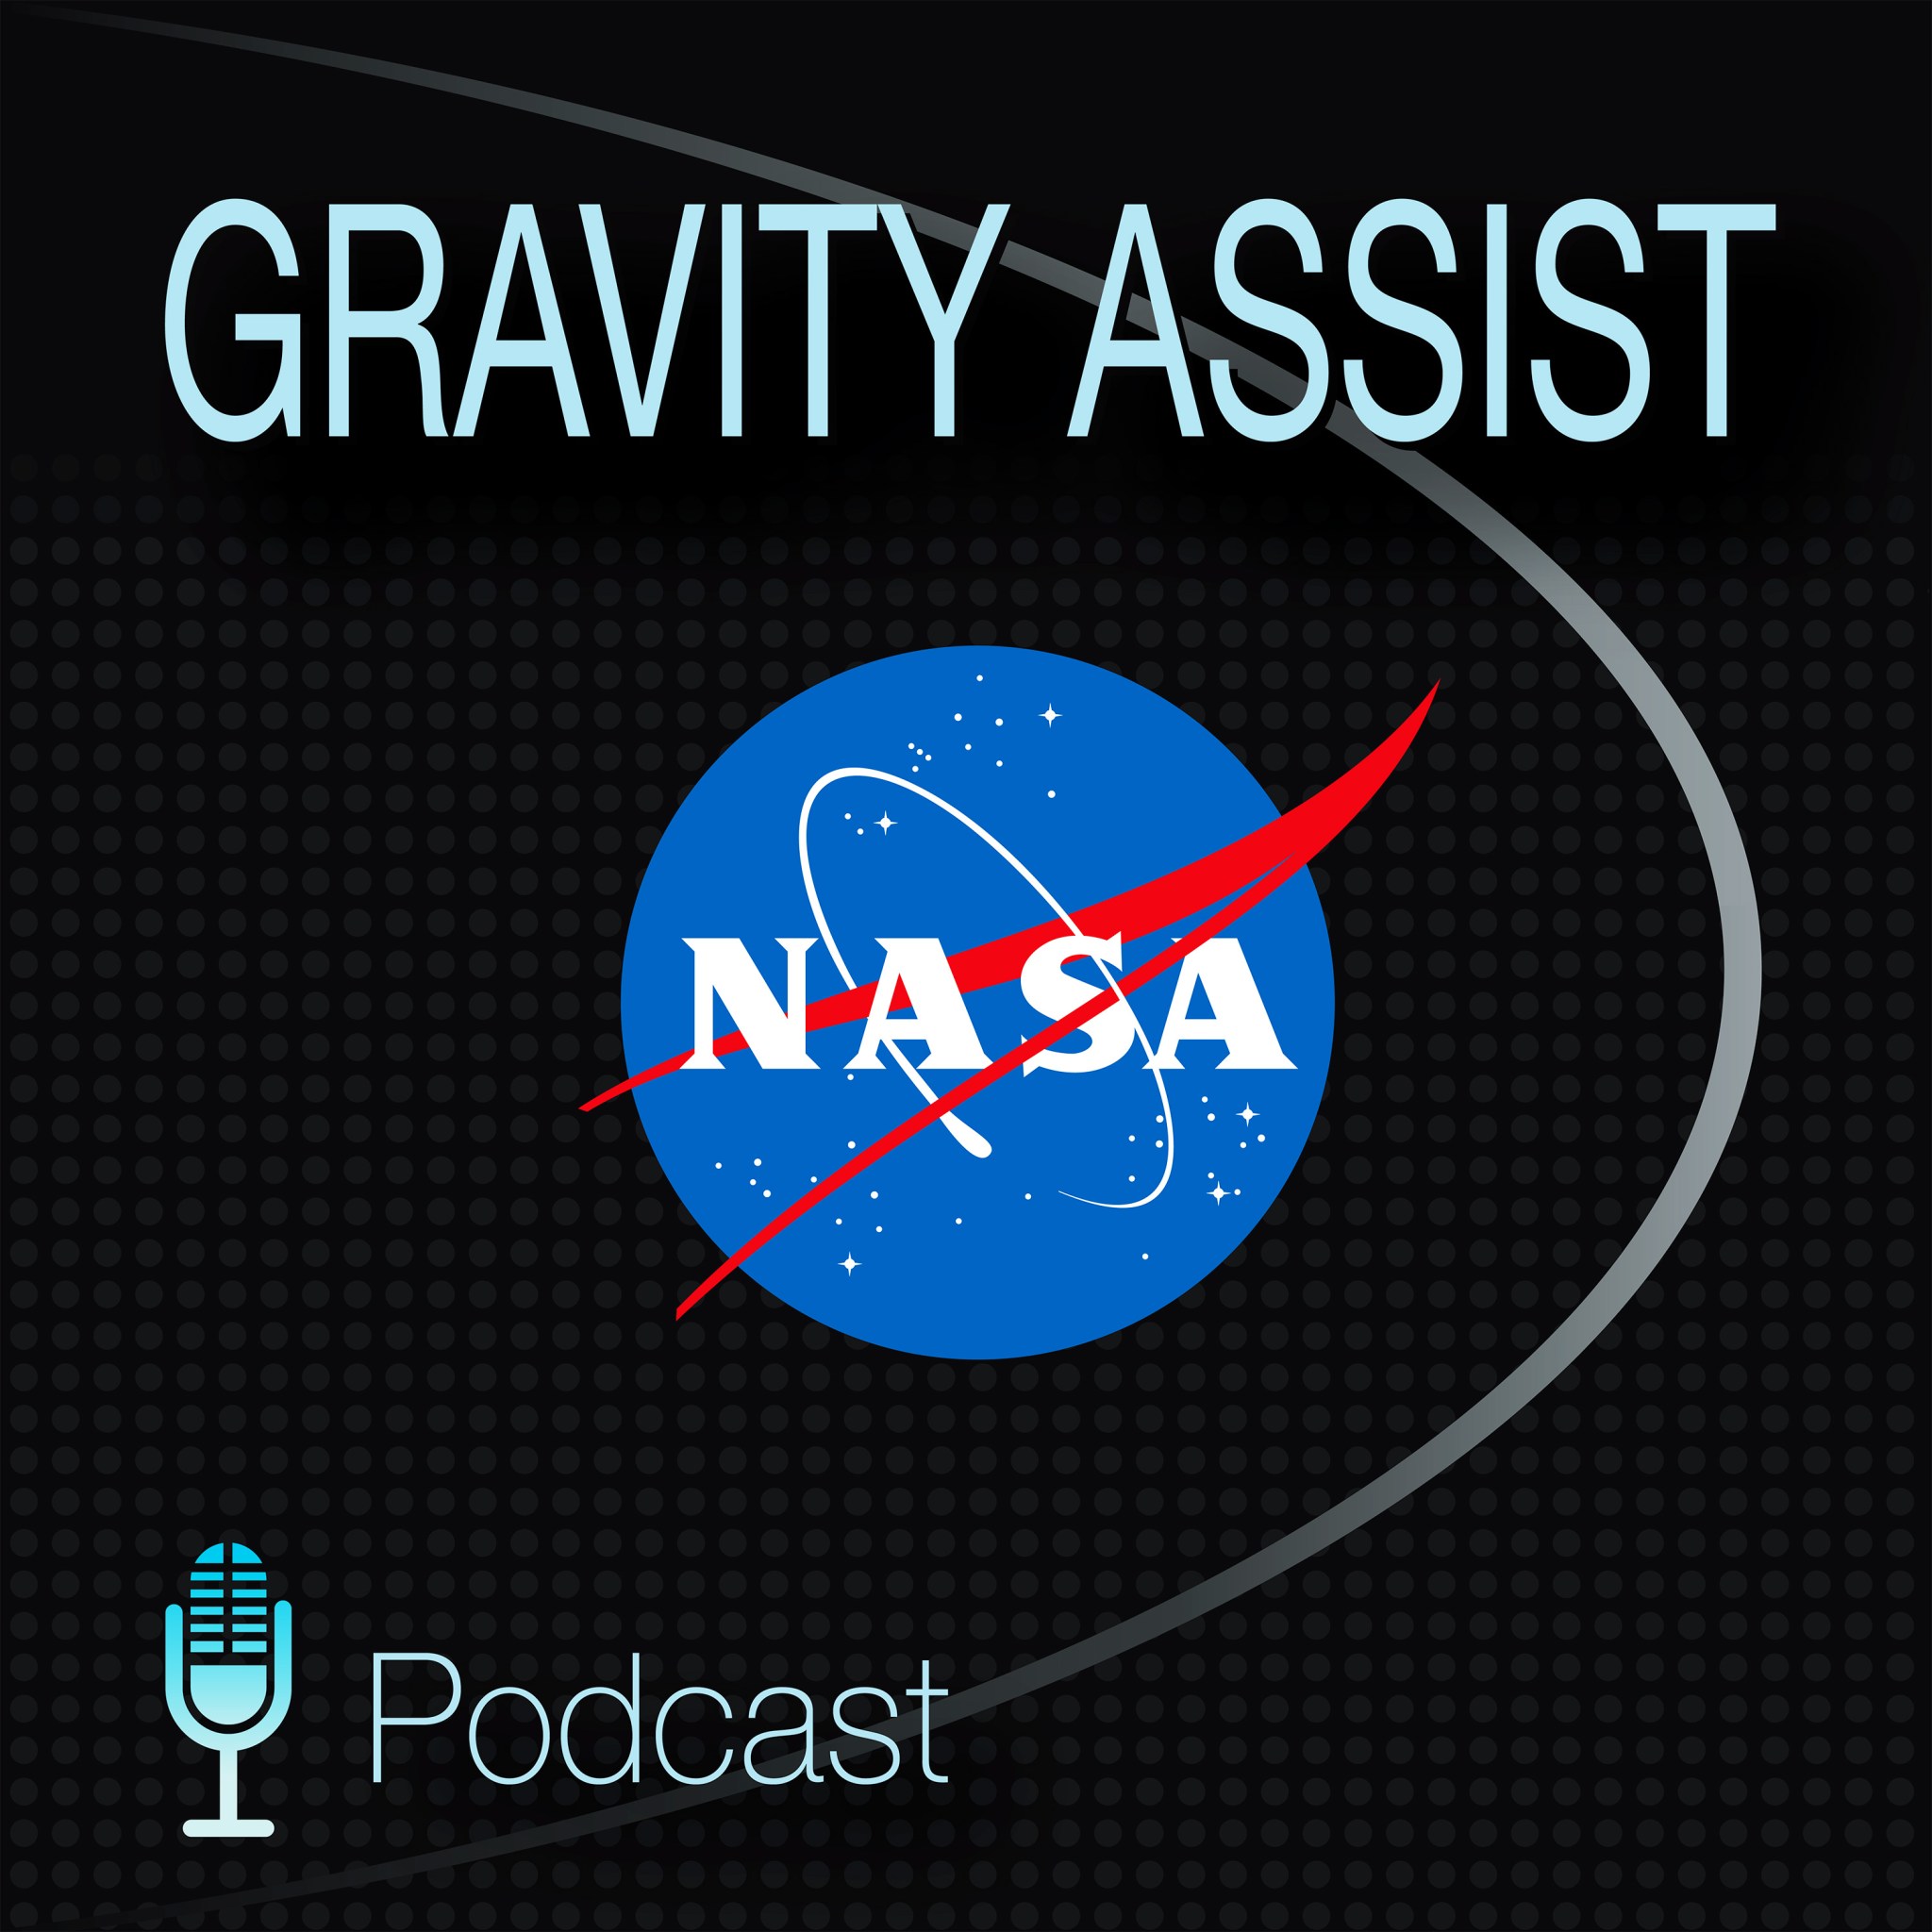 Gravity Assist podcast title with NASA insignia